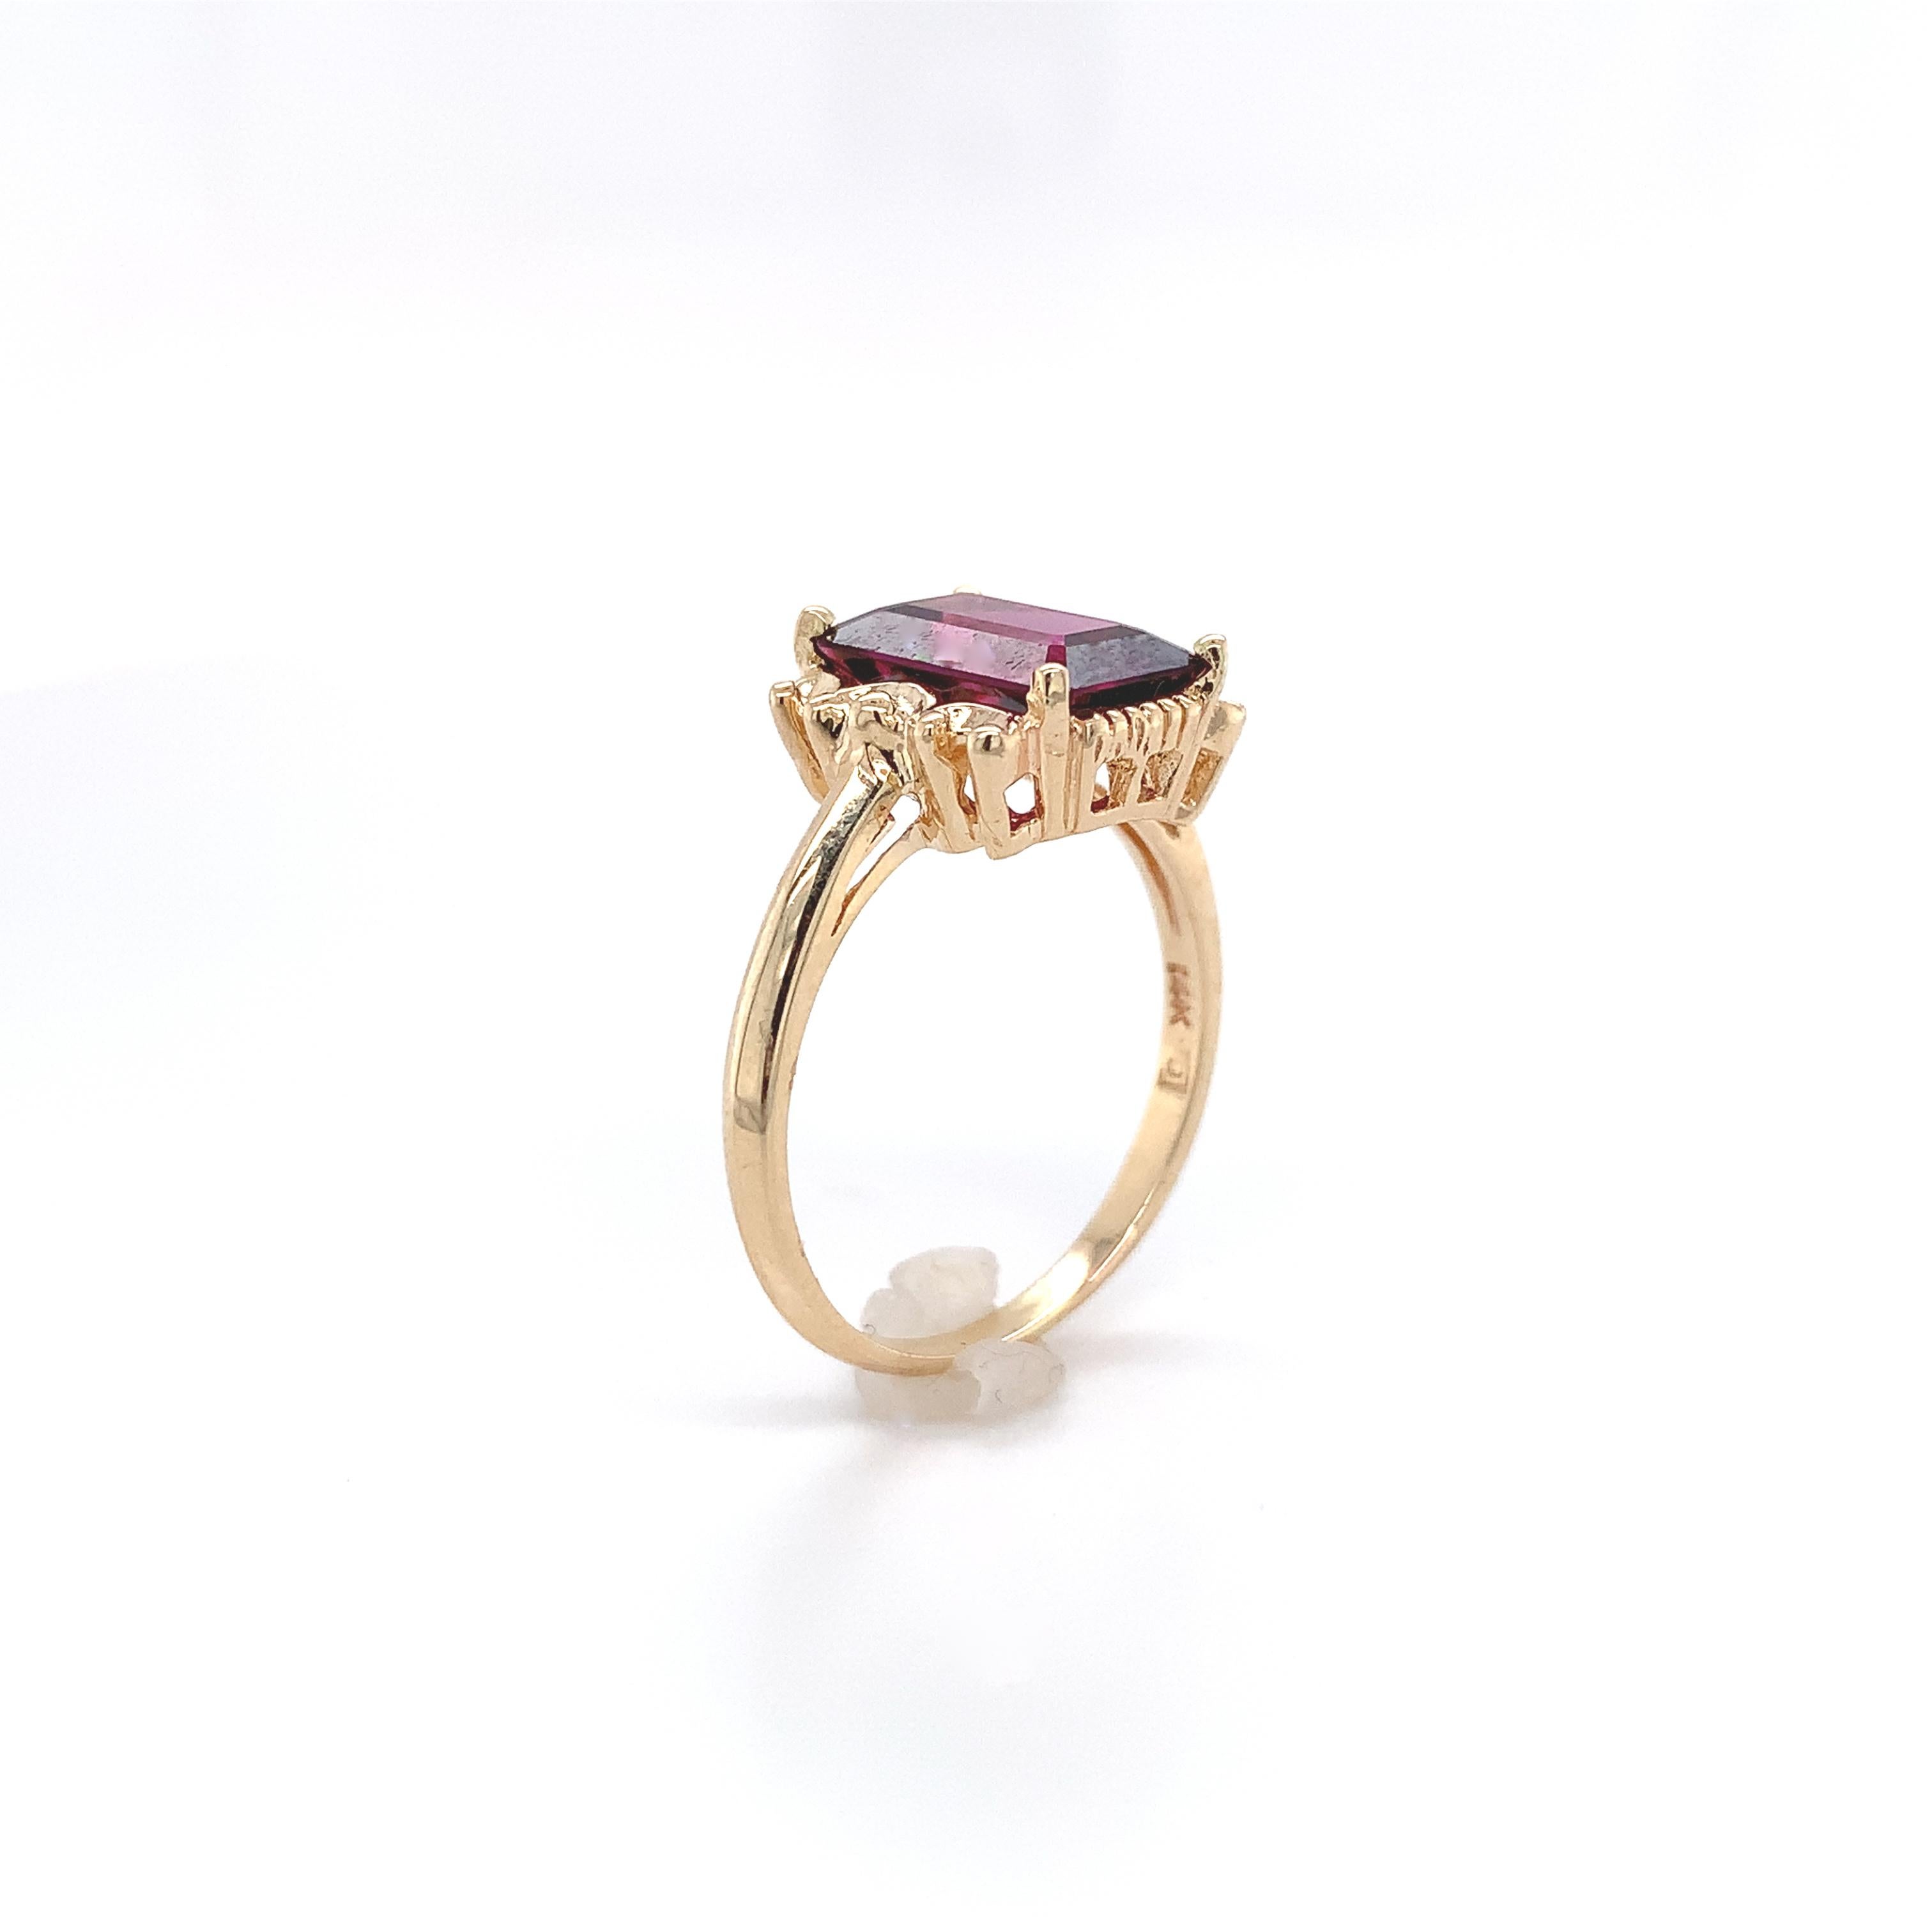 For Sale:  14K Yellow Gold Ring with Emerald Cut 3.51 carat Rhodolite Garnet 4